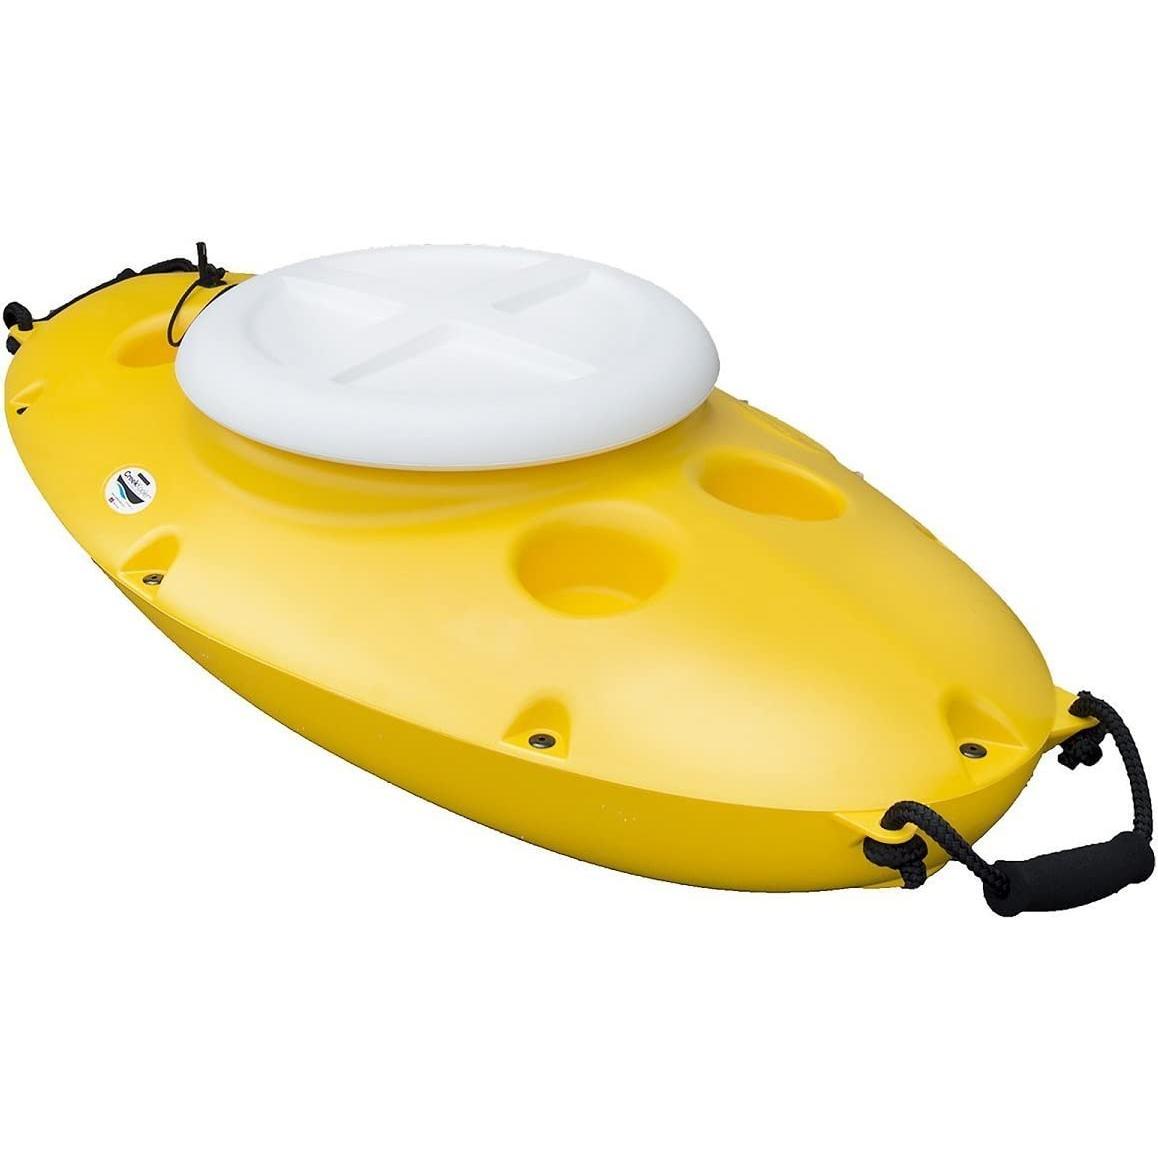 CreekKooler Floating Cooler, Tow on Rivers and Lakes with Canoe or Kayak, 30 Quart